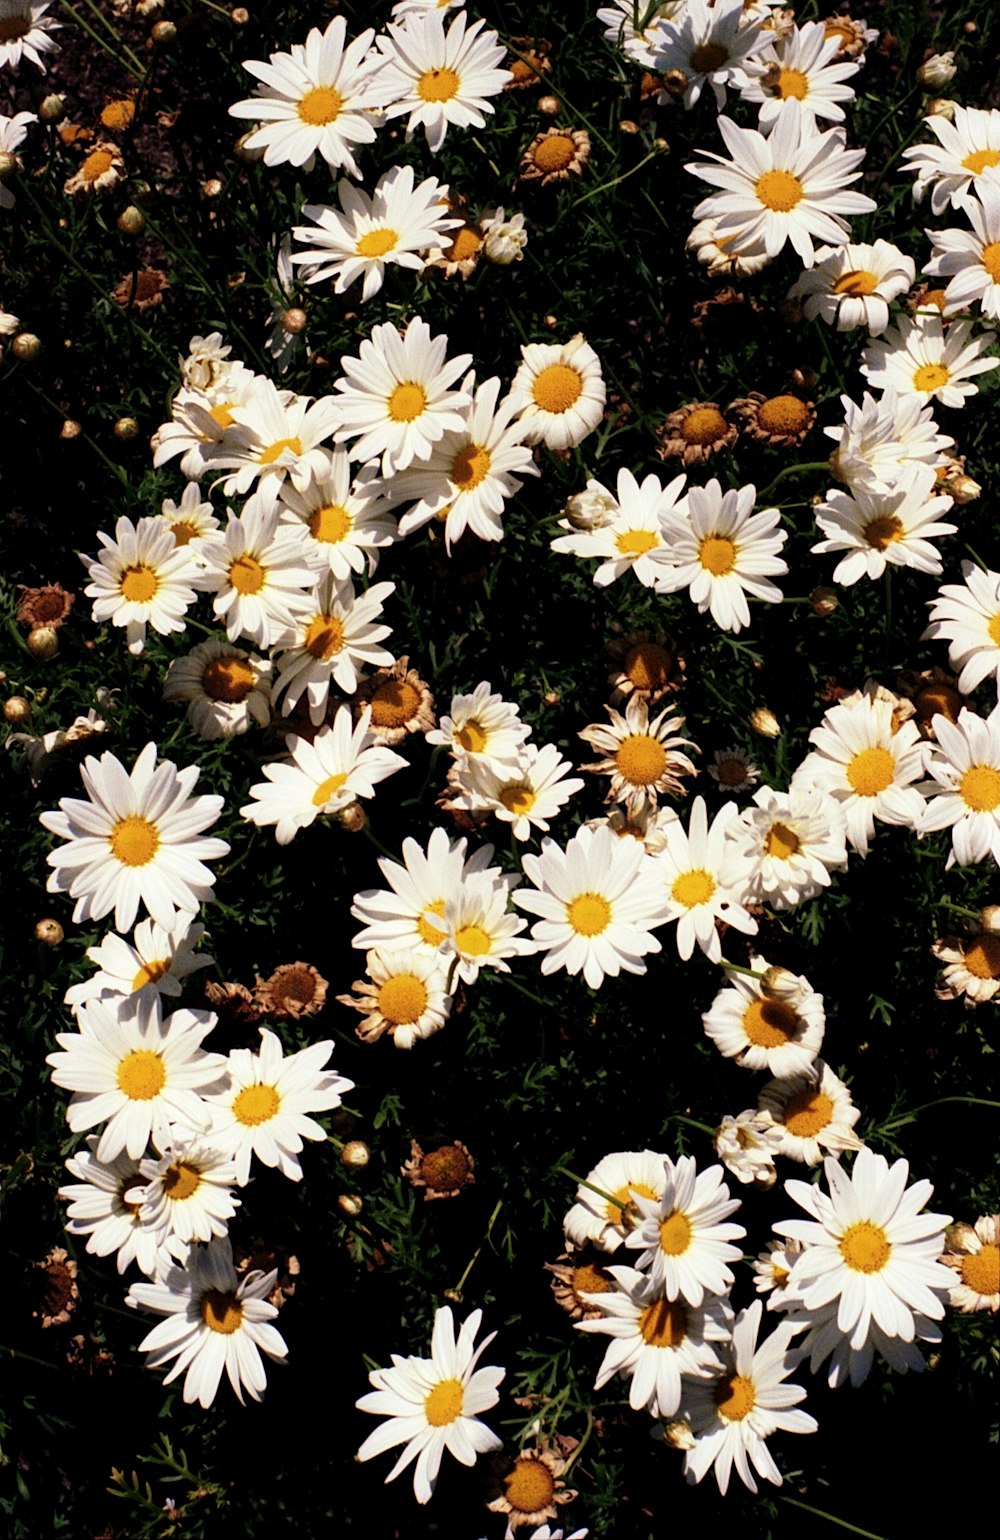 a bunch of white daisies in a field